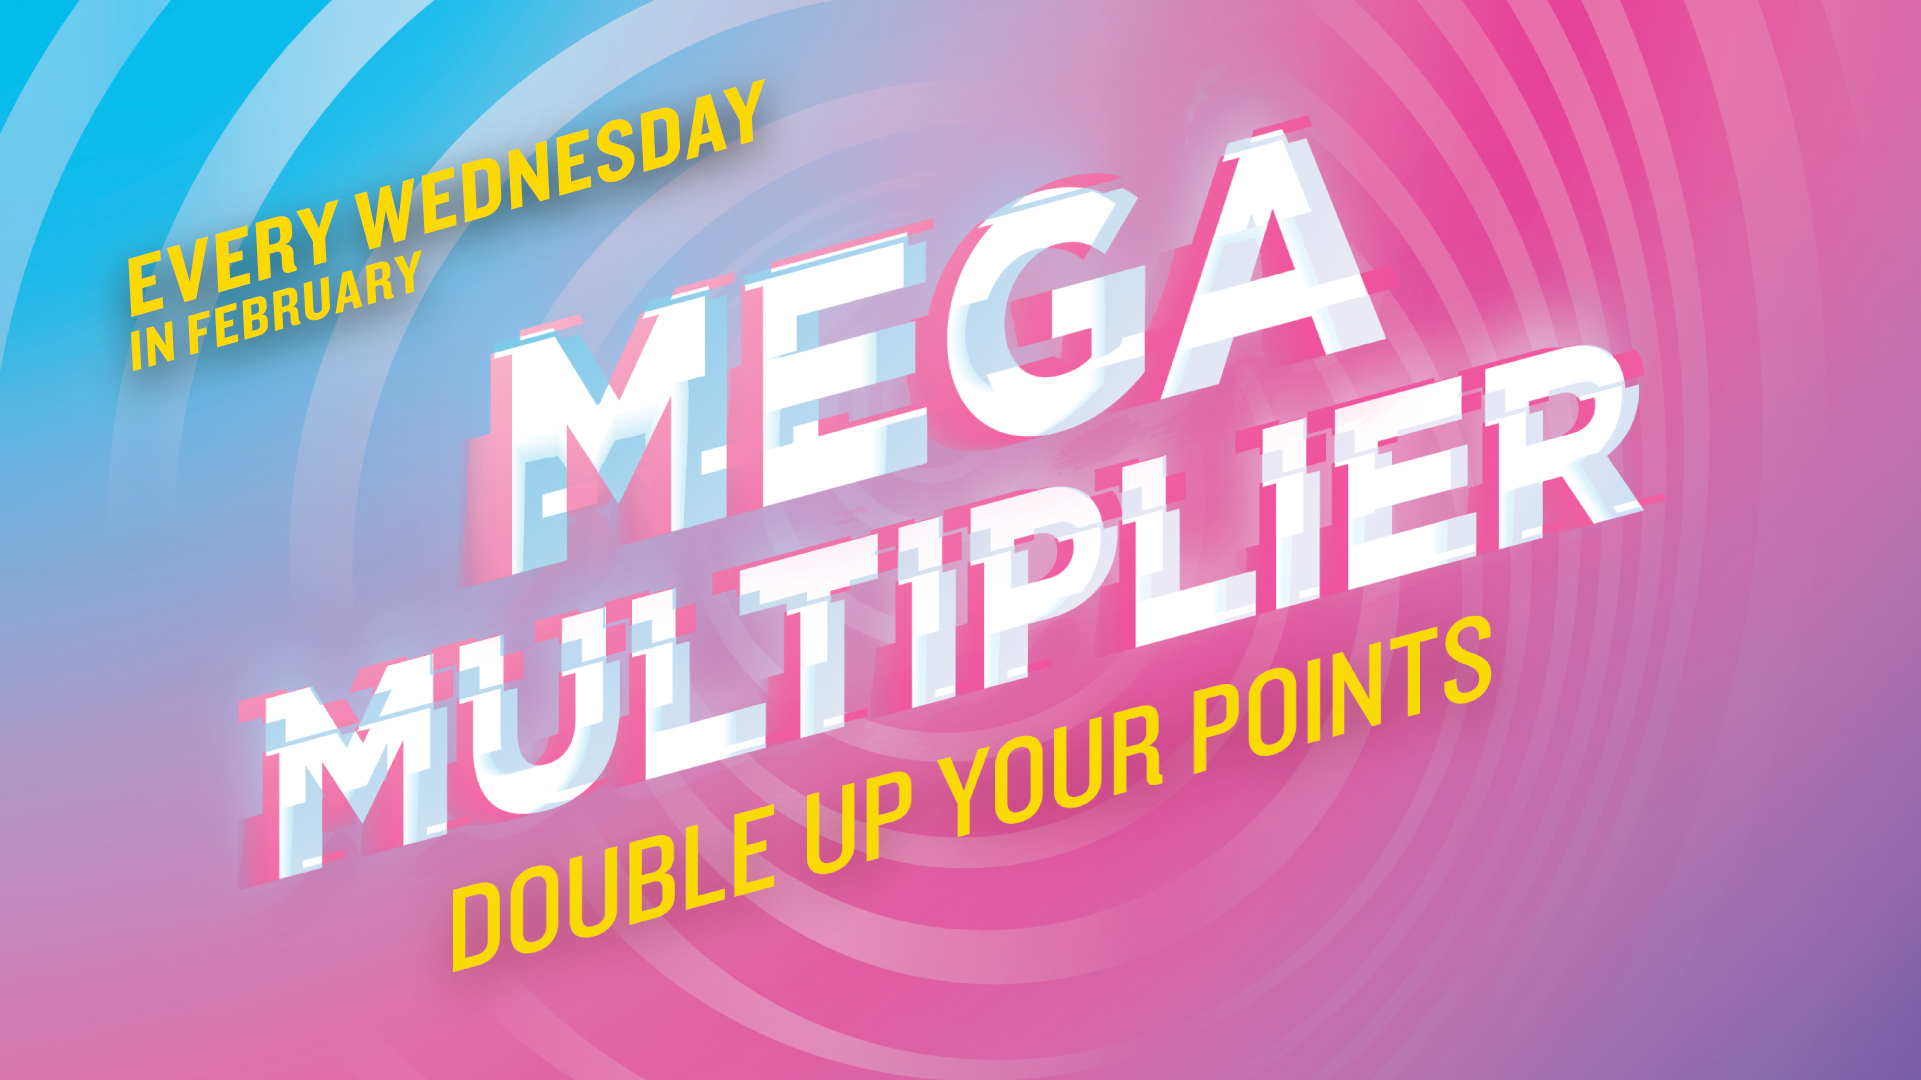 Mega Multiplier Double Up Your Points Every Wednesday In February Maverick 10X Platinum 8X Gold 6X Silver 4X Blue 2X We are going to DOUBLE every Bonus Point you earn. That's in addition to your everyday multipliers.